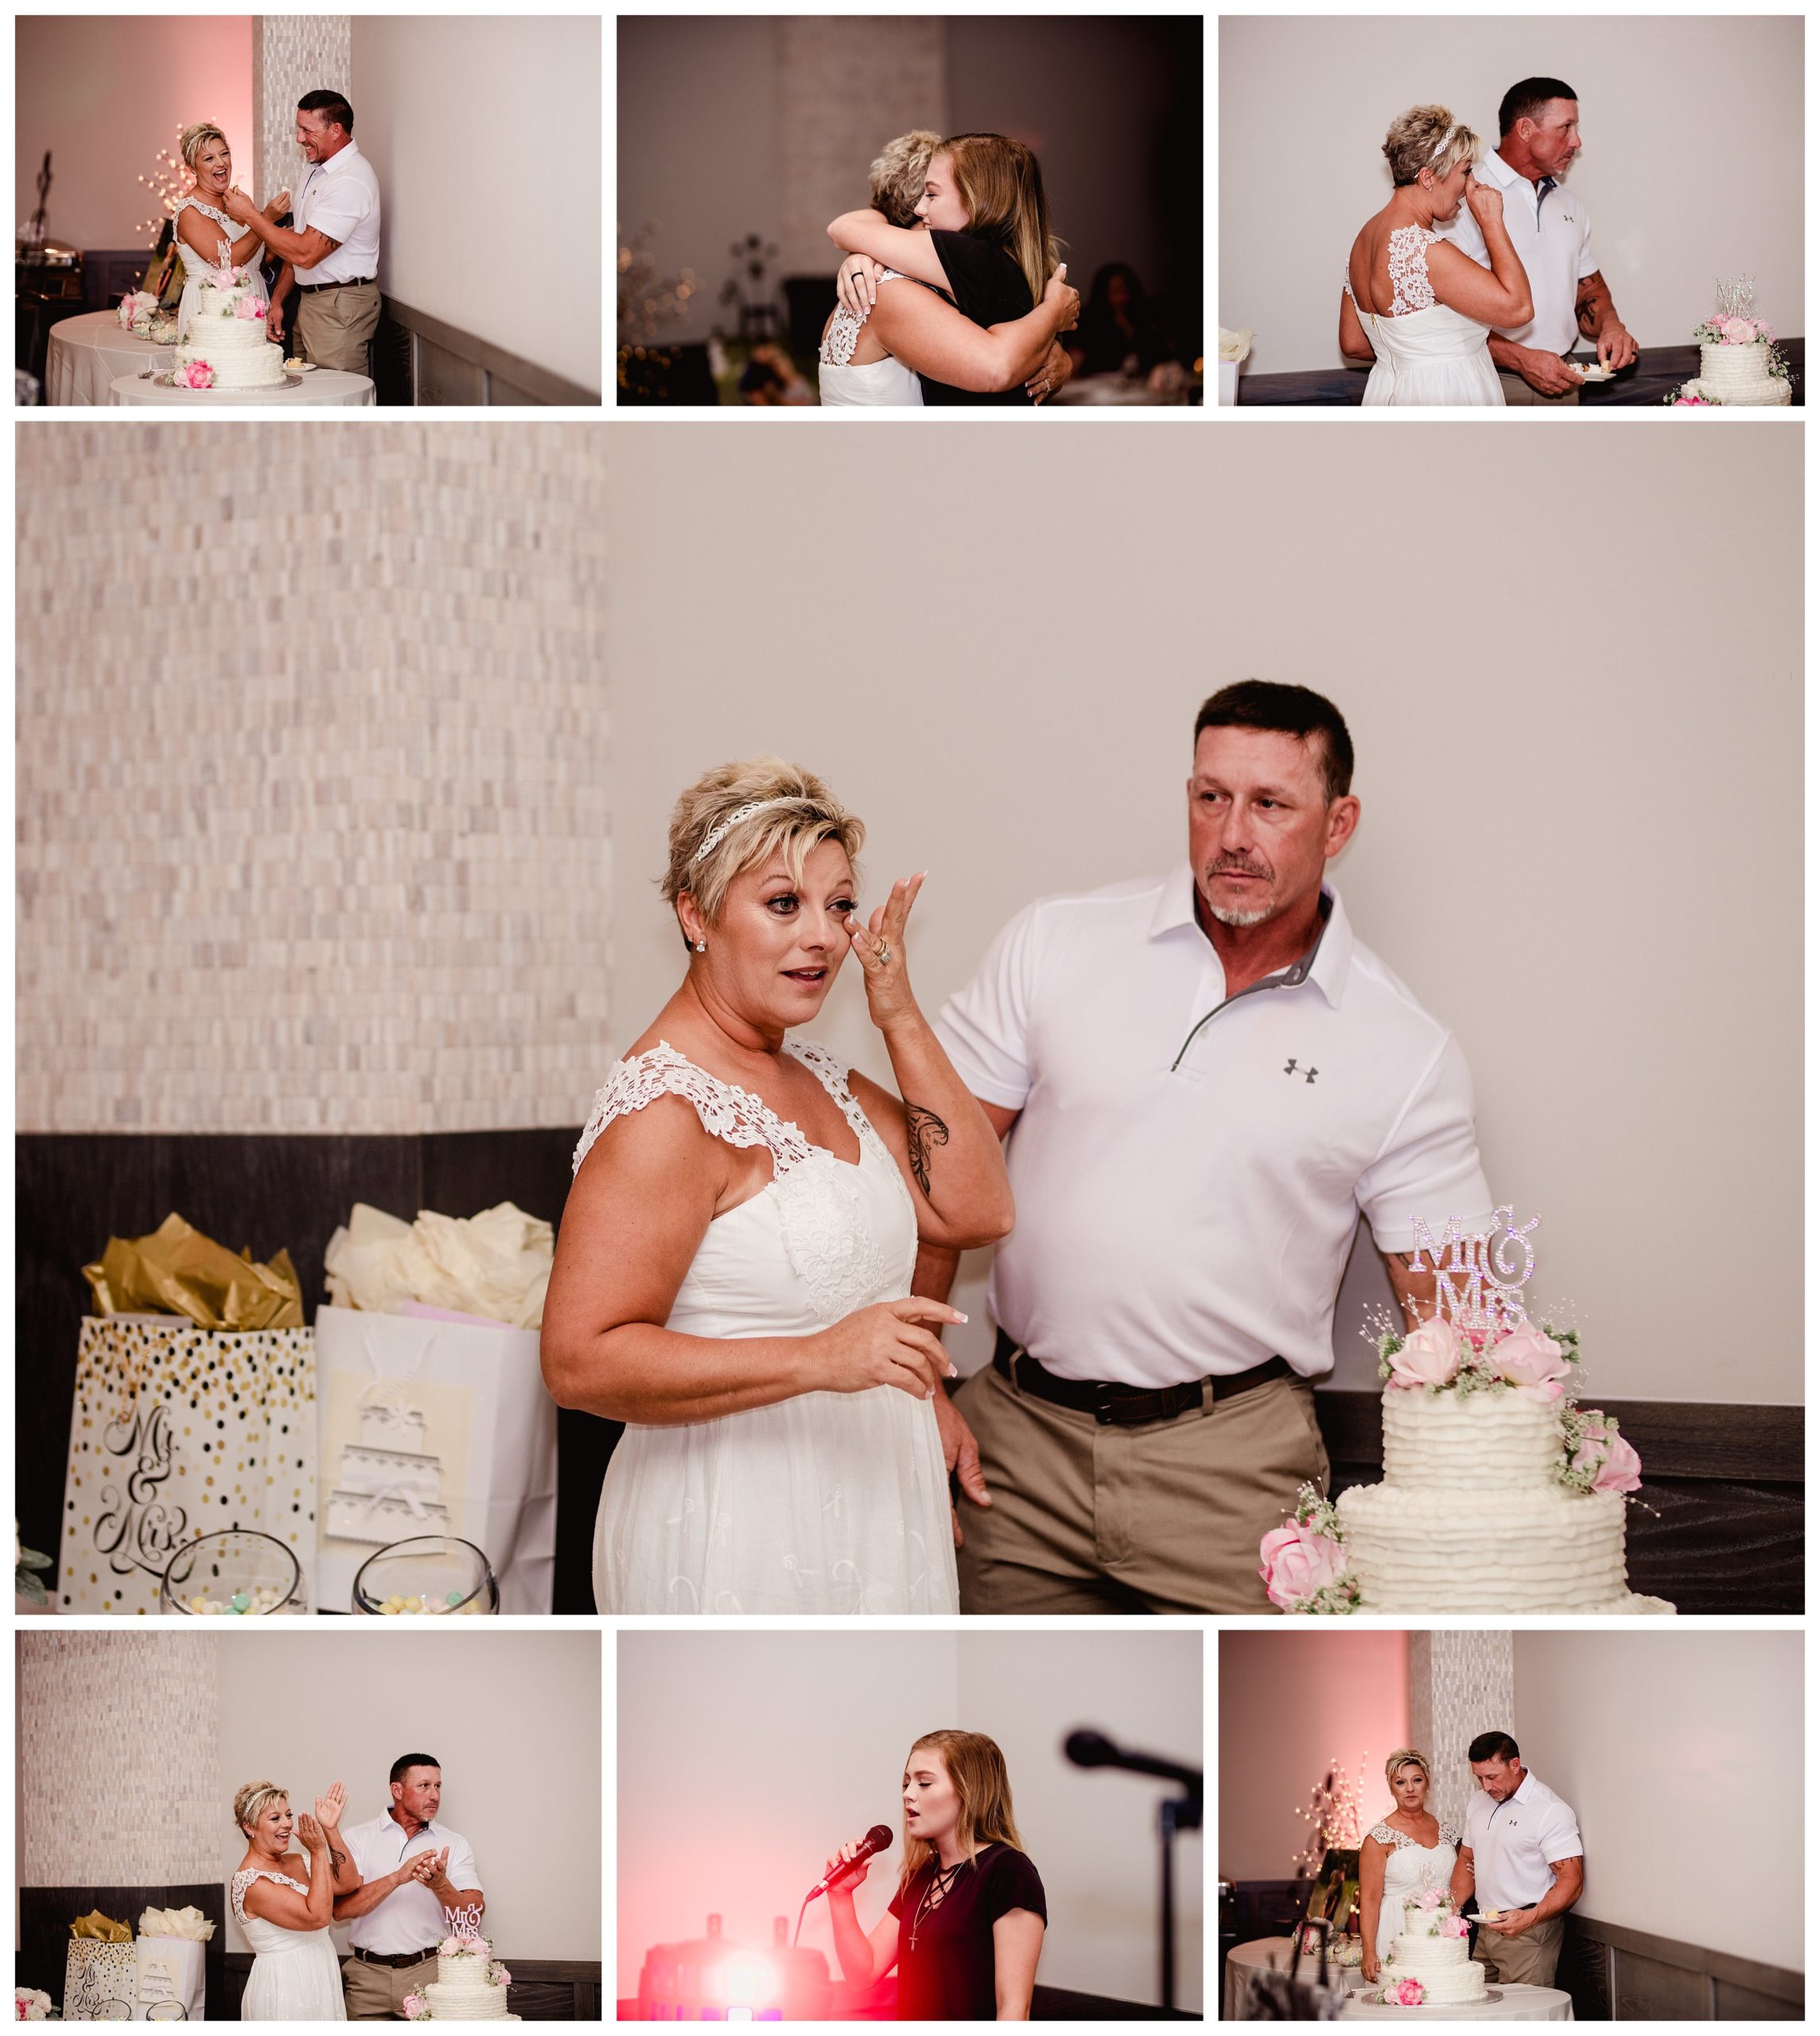 Special moments during the wedding reception taken by photographer in North Florida.